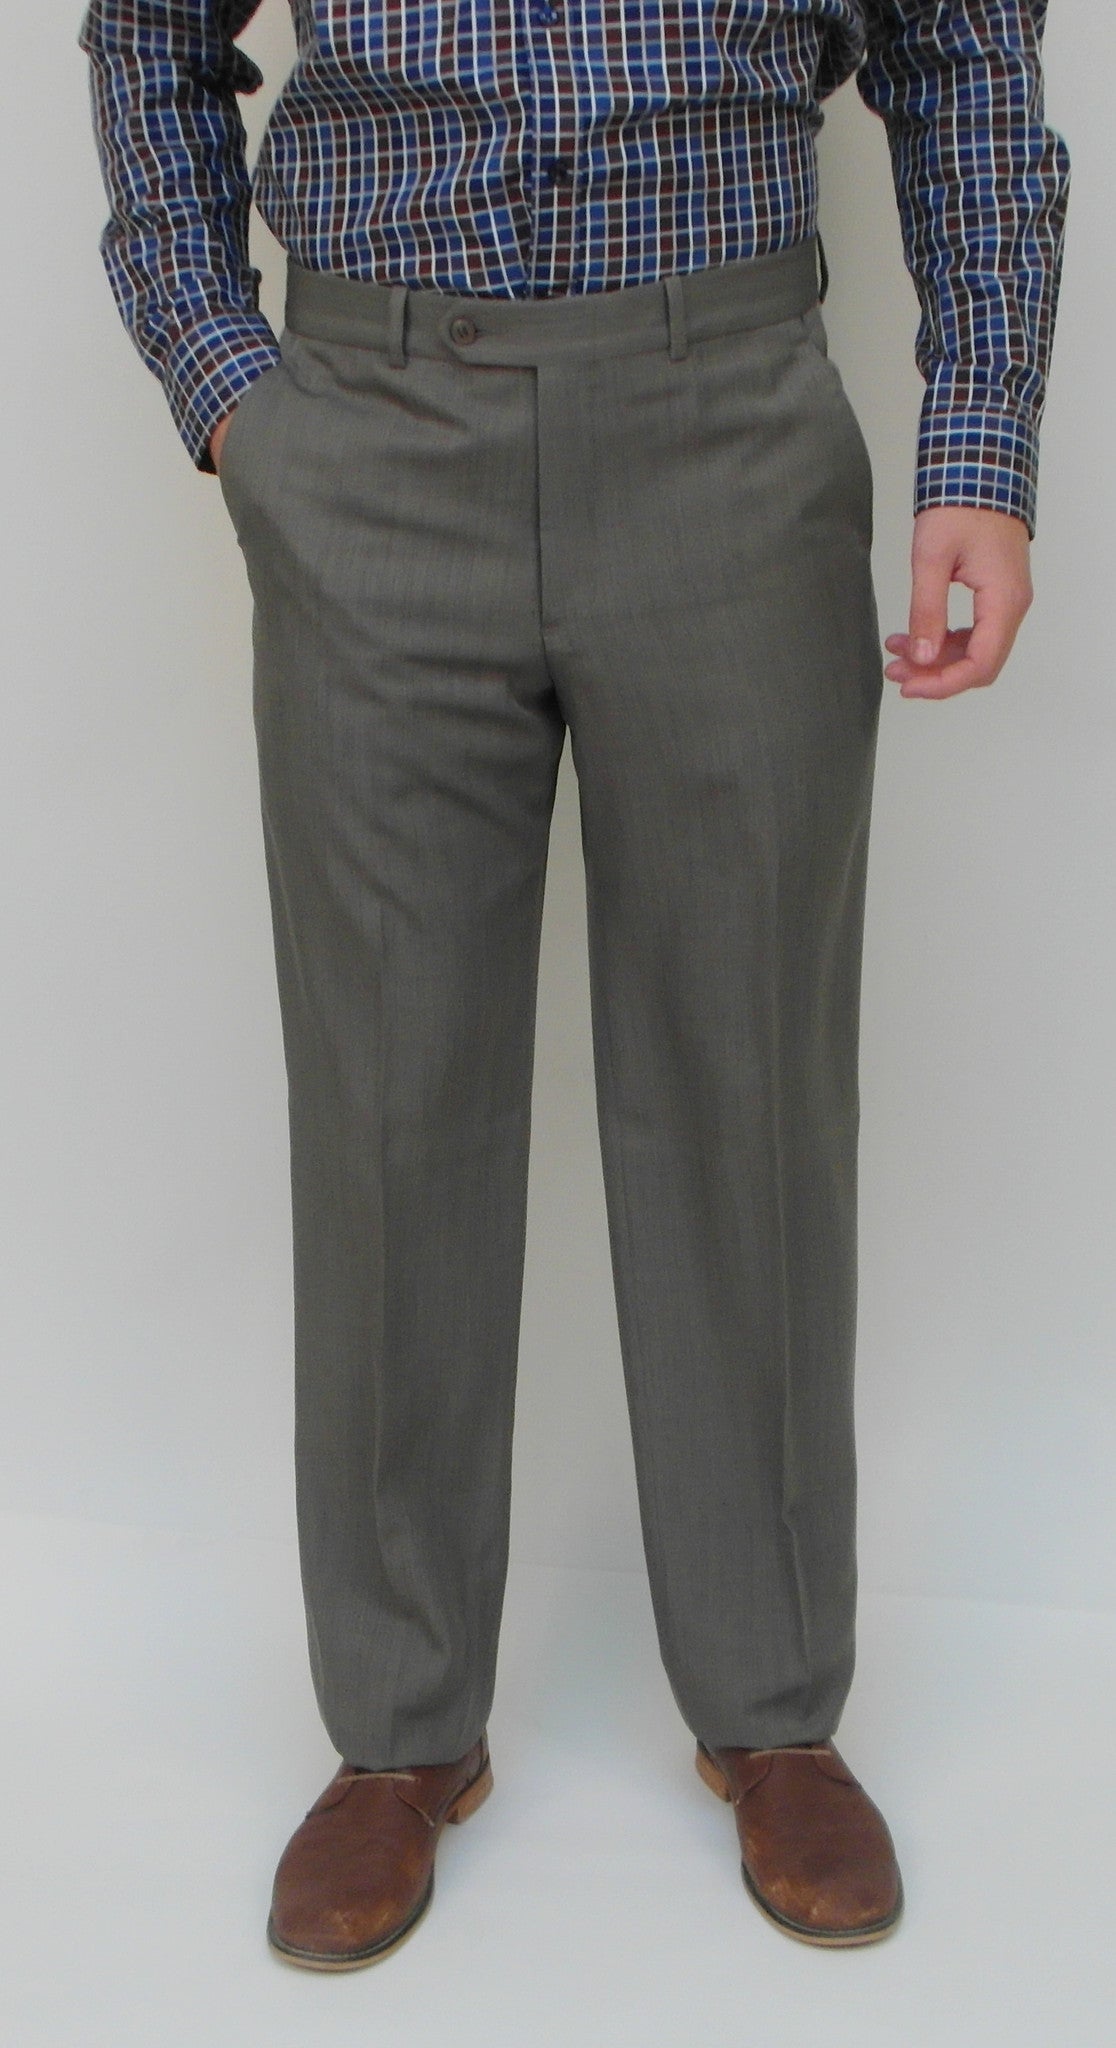 Gala - A1 BT - Dress Pant - Yates (Double Pleat Front) - Big and Tall 